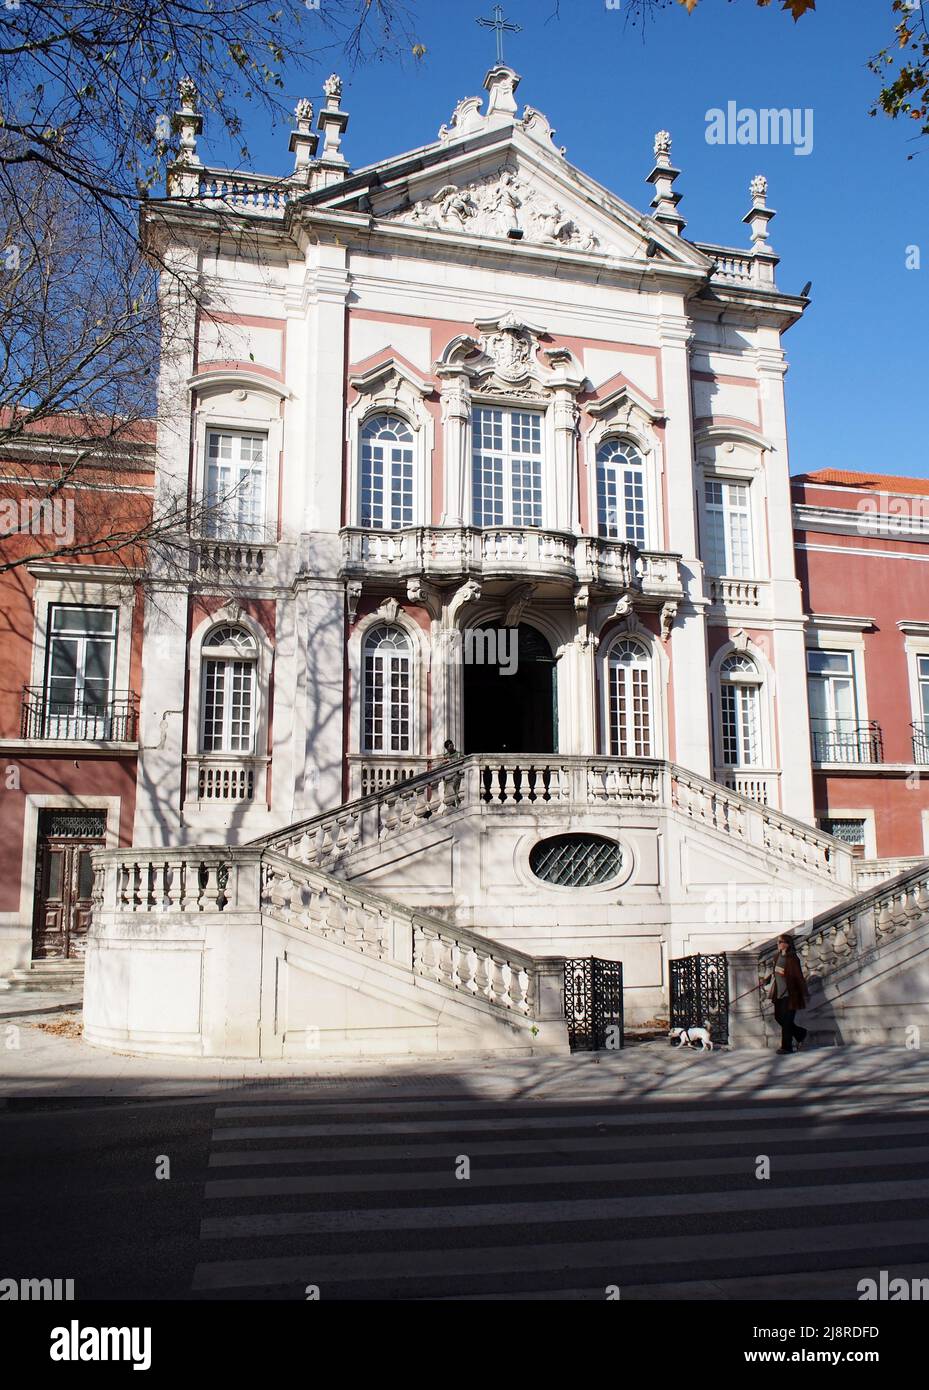 Bemposta Palace, aka Queen’s Palace, neoclassical palace  built in 17th and 18th centuries, currently houses Military Academy, Lisbon, Portugal Stock Photo